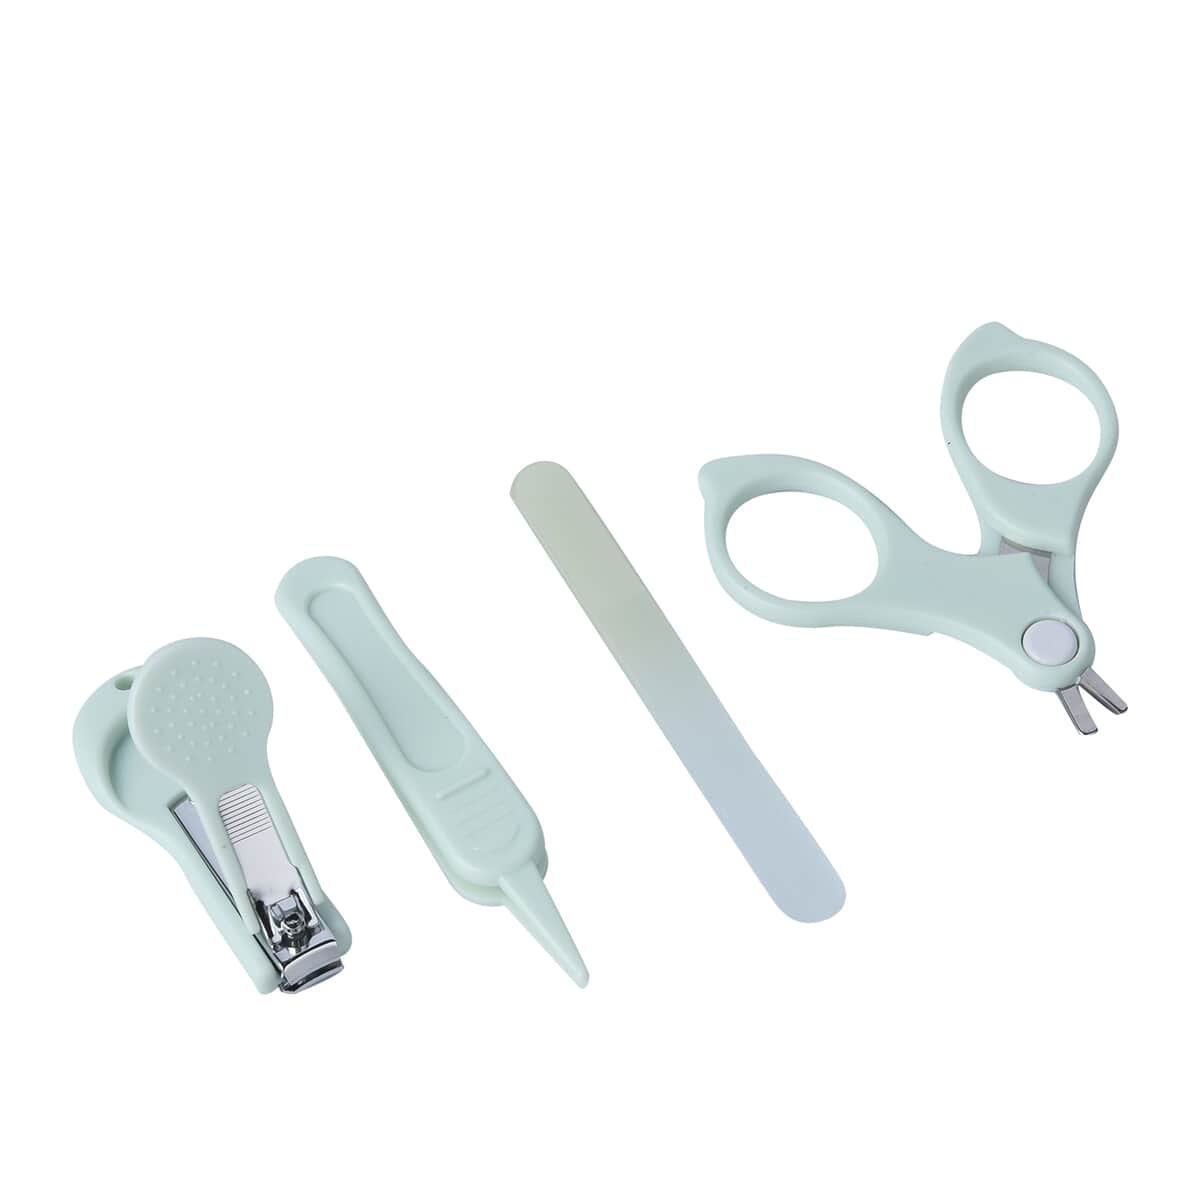 4in1 Baby Green Ceramic & Stainless Steel Manicure Set (Scissor, Nail Clipper, Tweezers, Nail File) image number 4